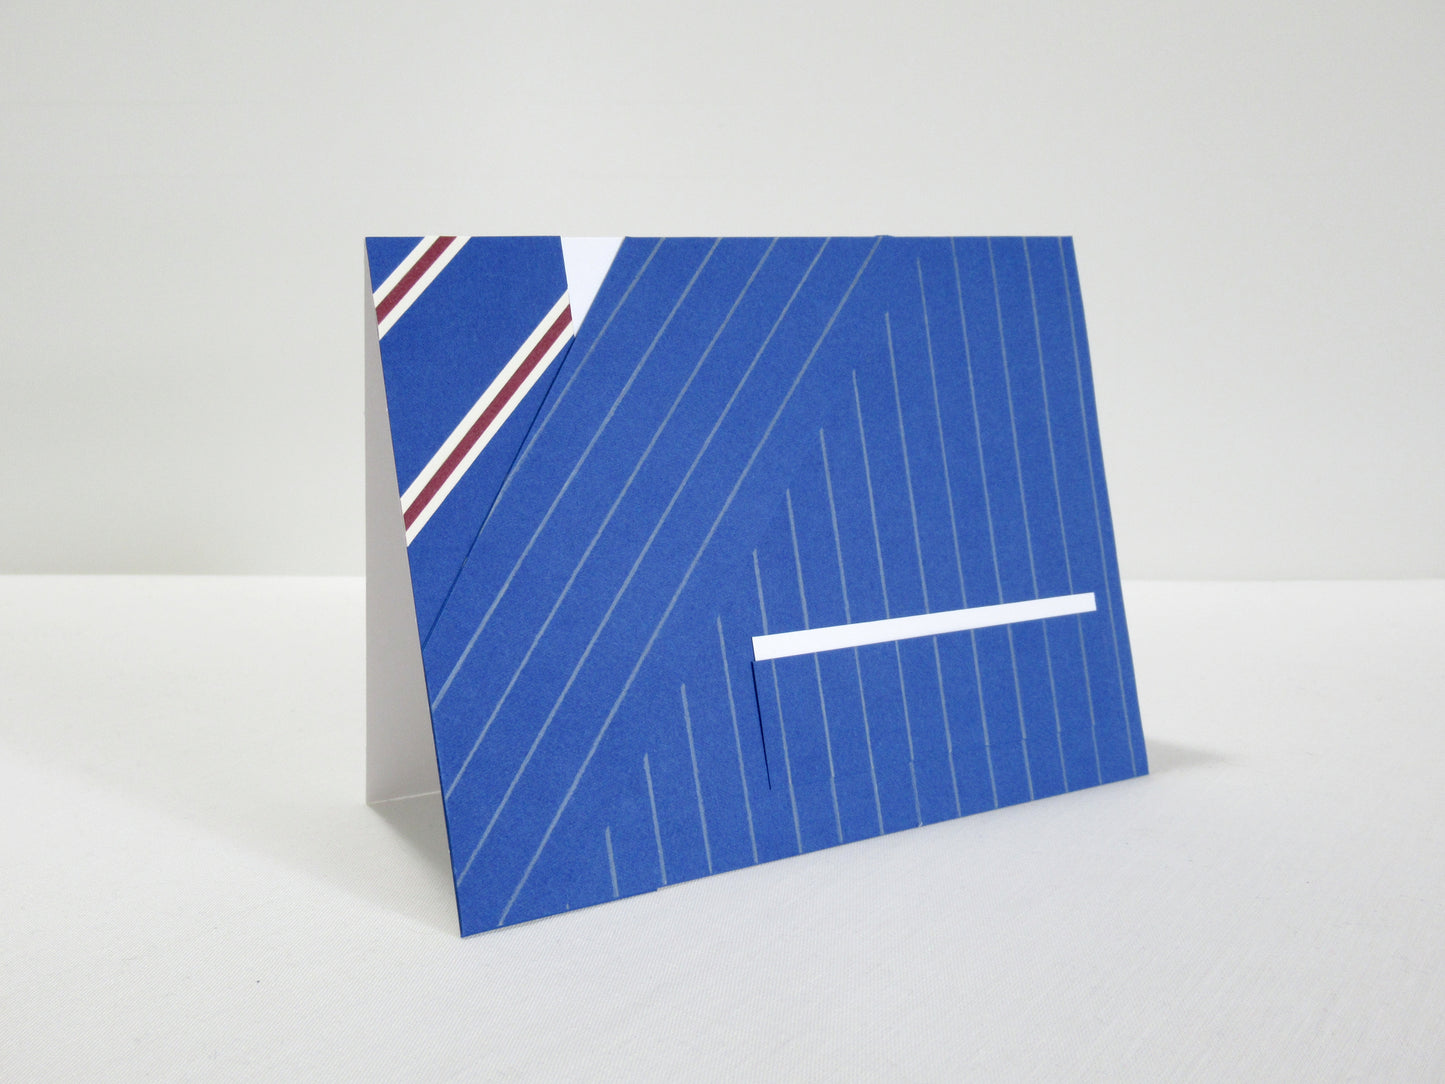 A card stands at an angle on a desk. The front of the card looks like a portion of person's suit, blue pinstripes, white pocket square, and a blue striped tie. It's designed to look like an outfit worn by Harry Hart in the movie Kingsman: The Secret Service.